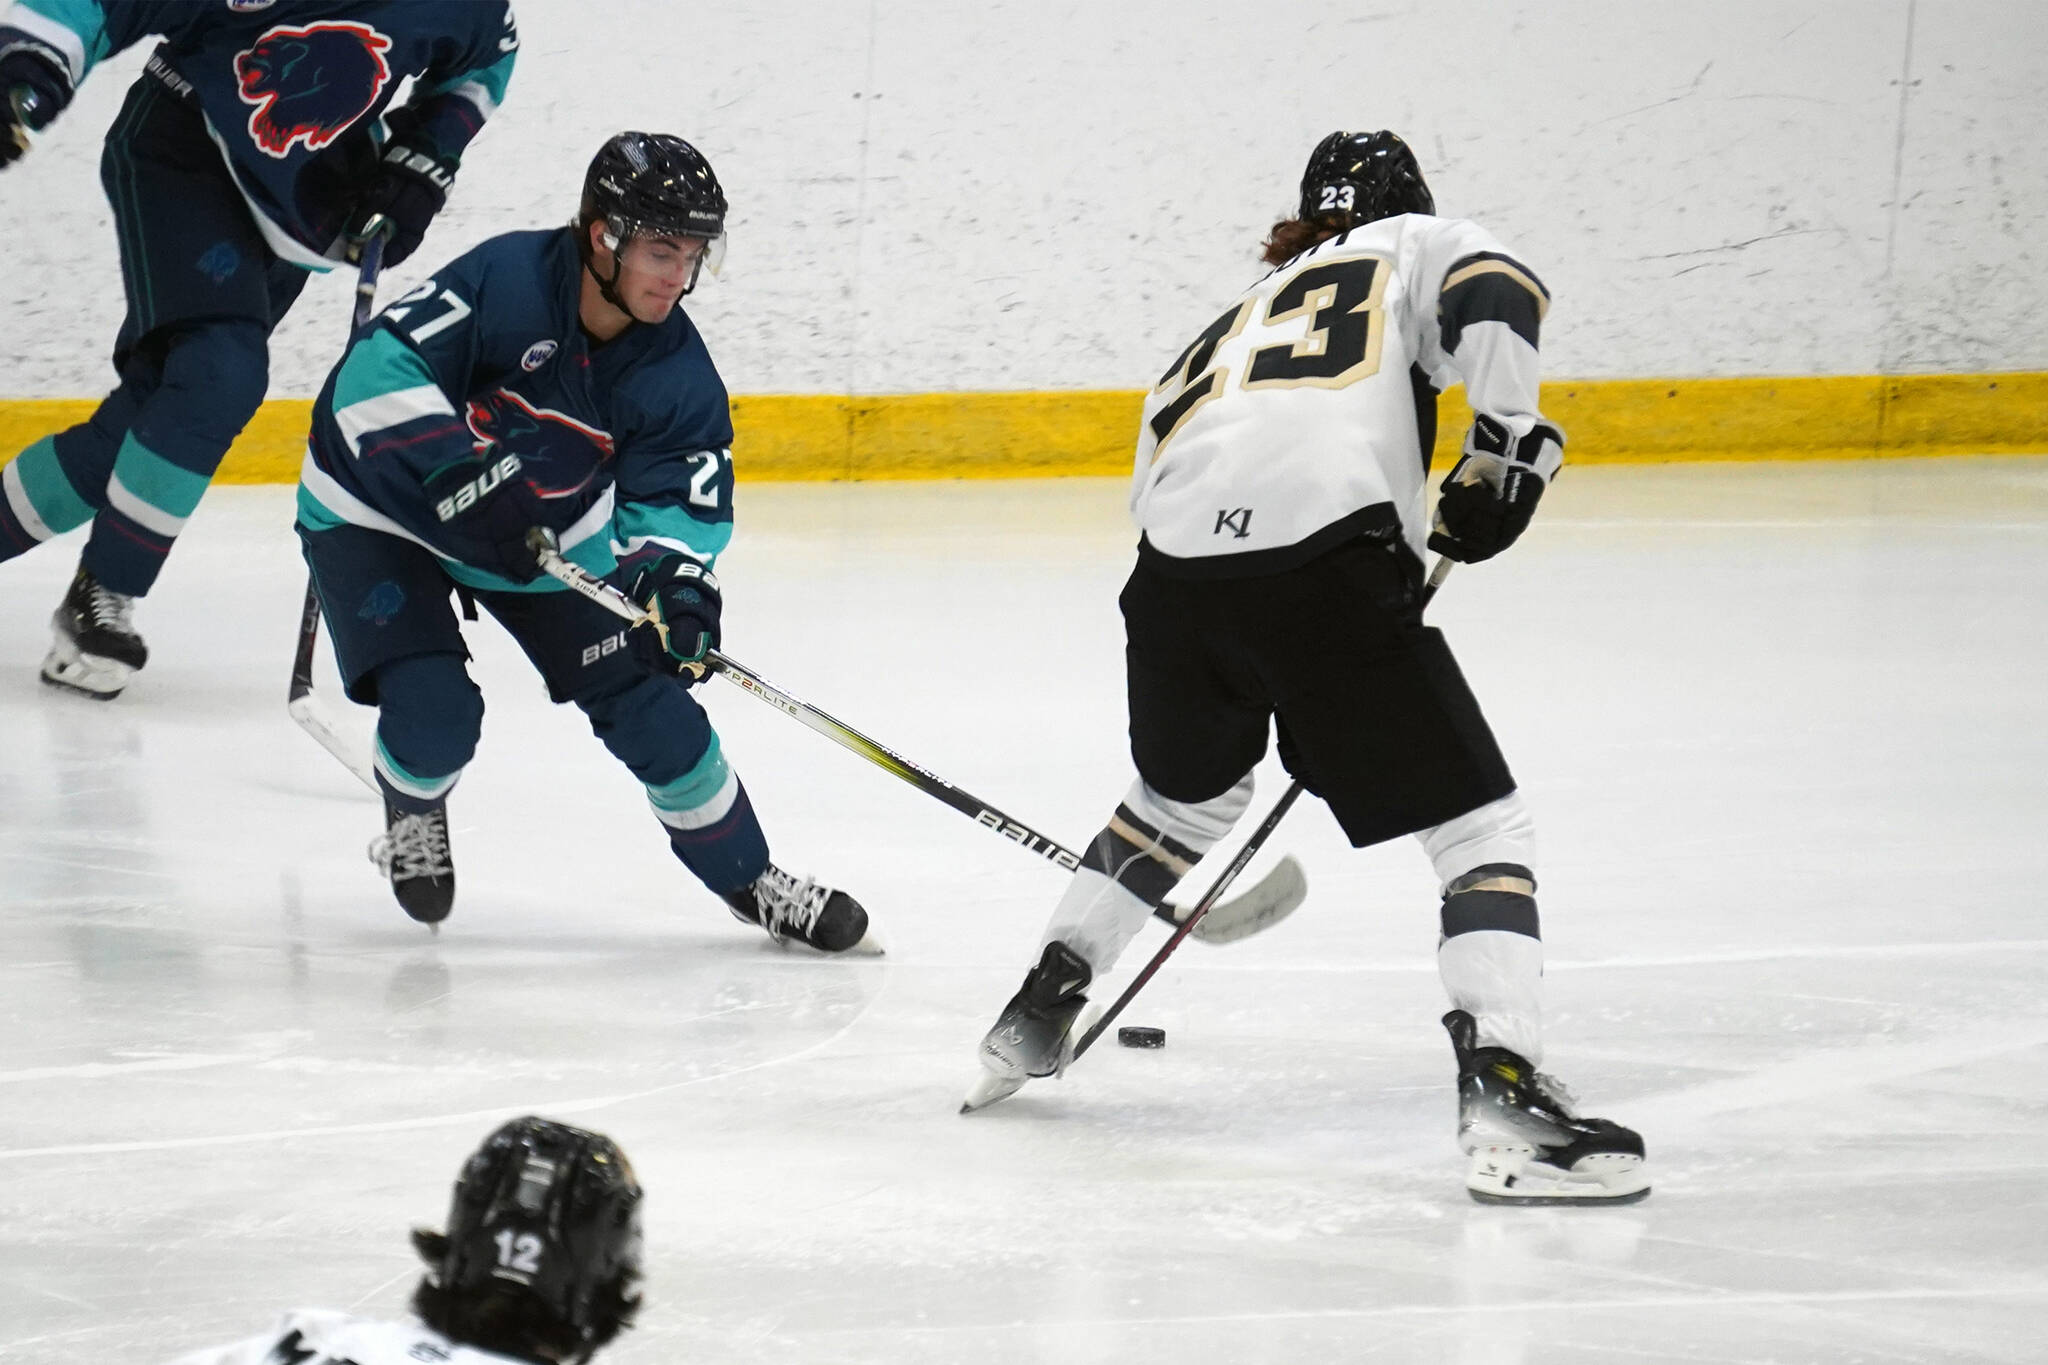 Anchorage’s Danny Bagnole and Kenai River’s Jackson Ebbott battle for the puck during a hockey game at the Soldotna Regional Sports Complex in Soldotna, Alaska, on Saturday, Oct. 7, 2023. (Jake Dye/Peninsula Clarion)